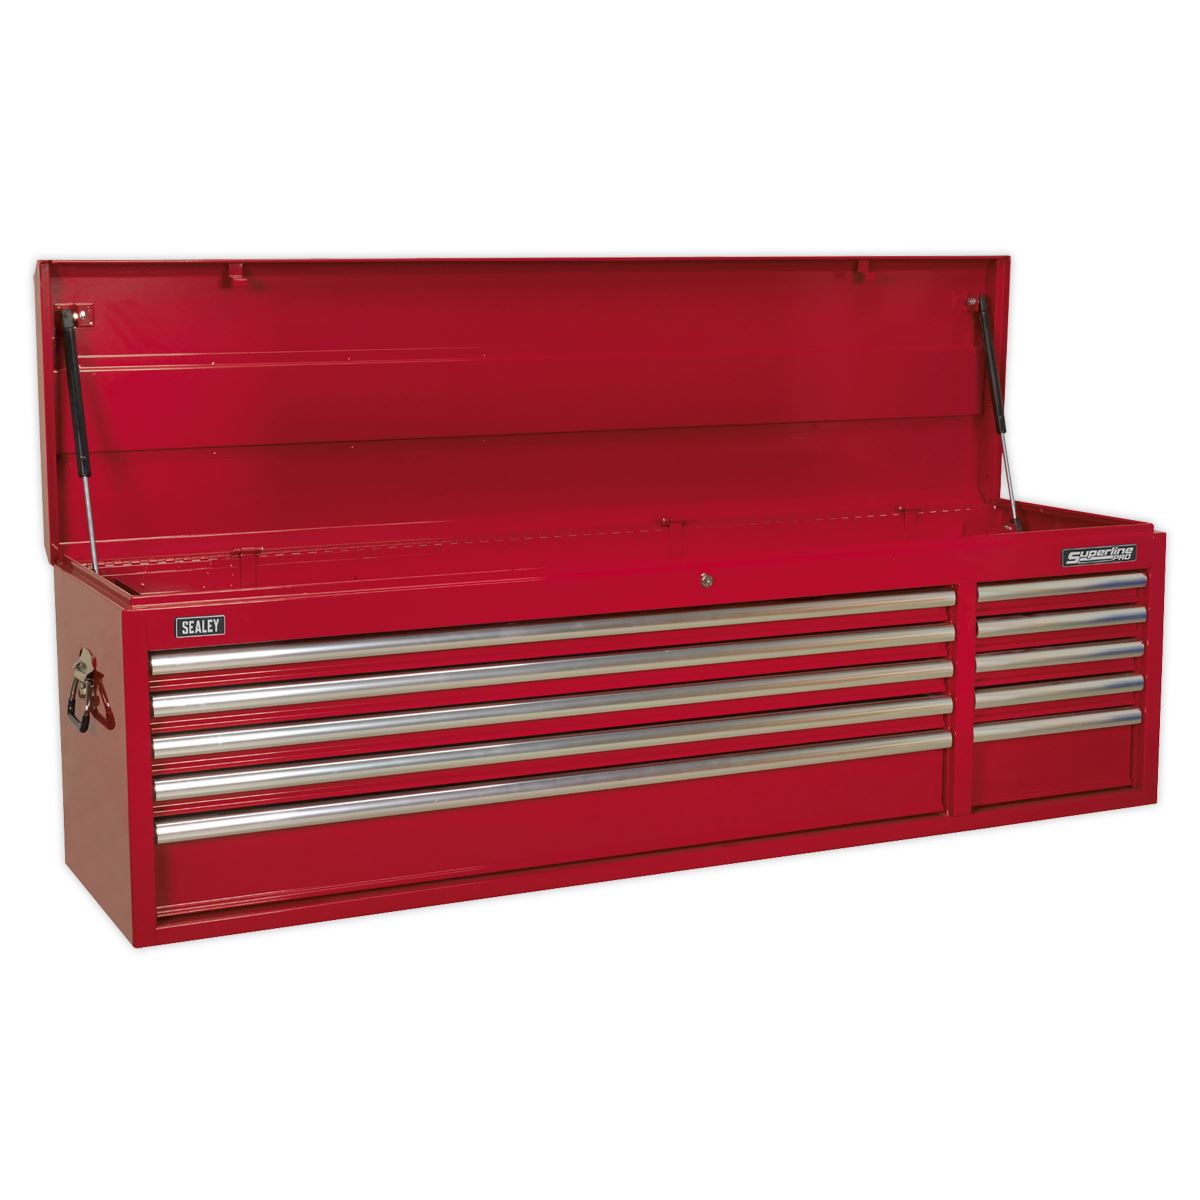 Sealey Topchest 10 Drawer with Ball Bearing Slides Heavy-Duty - Red AP6610